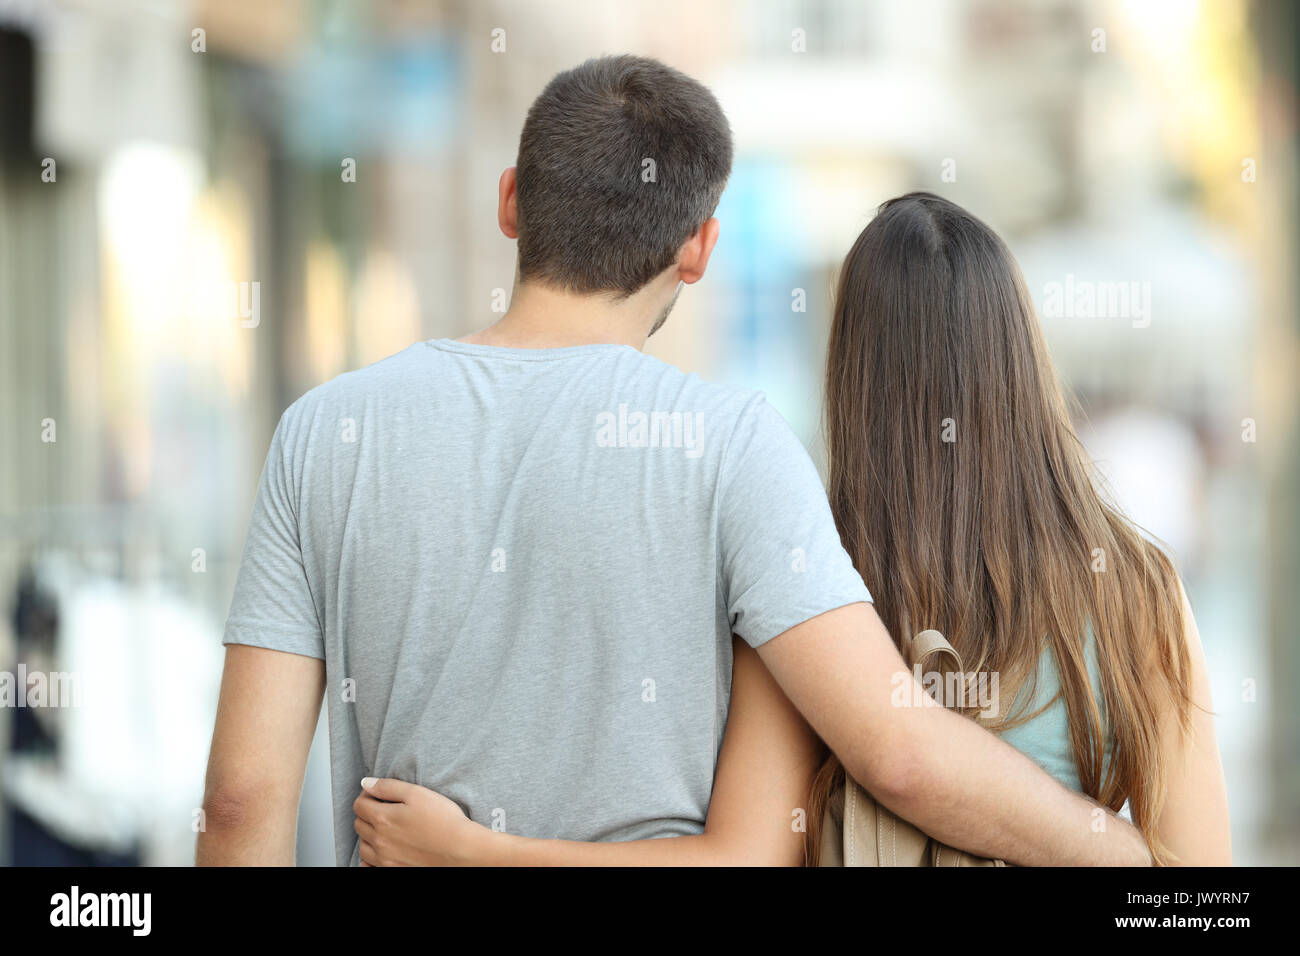 Back view portrait of a casual couple walking together on the street Stock Photo